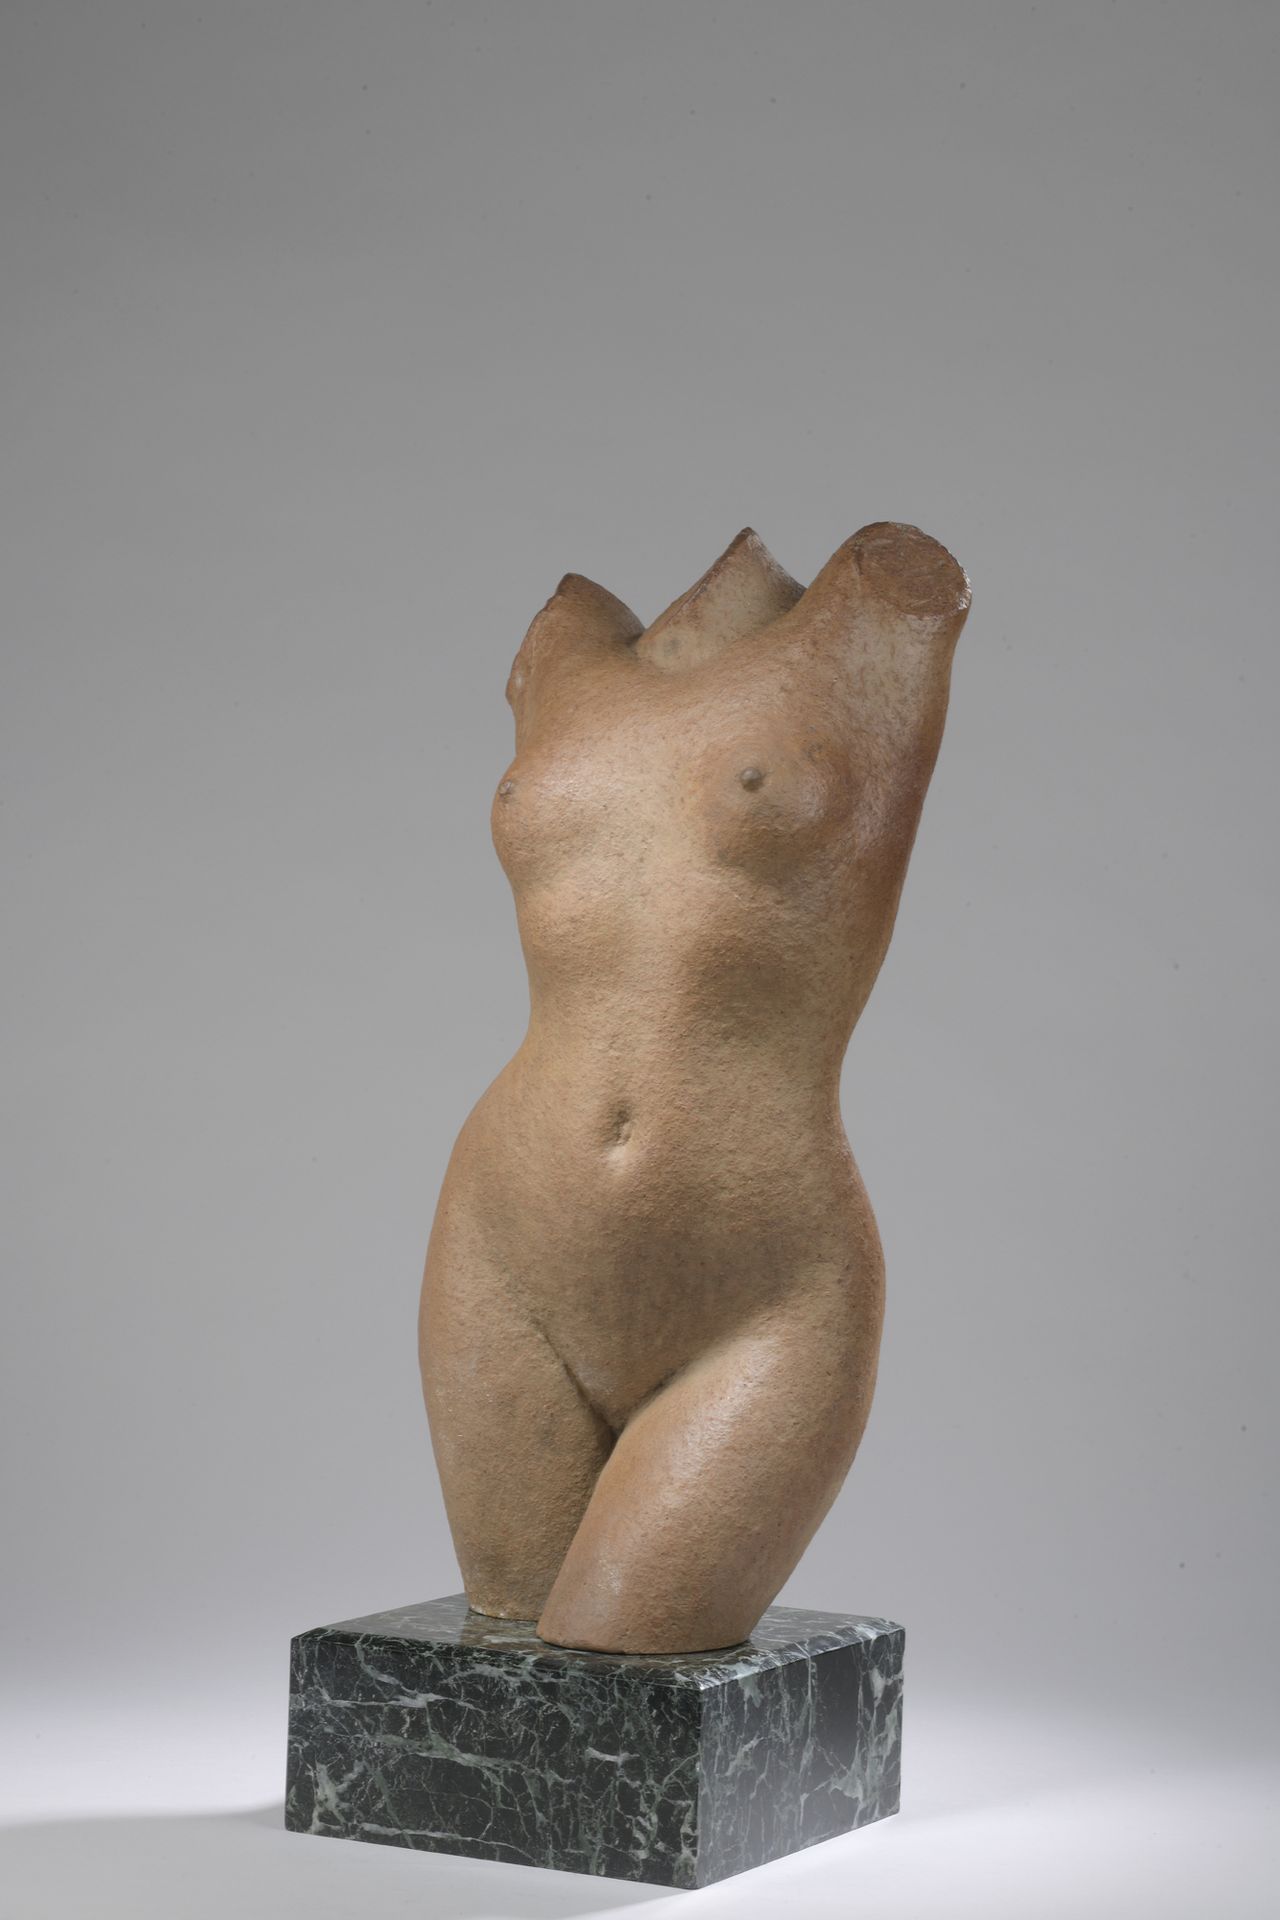 Null Marcel GIMOND (1894-1961)

Woman's torso with raised arms

Stoneware chamot&hellip;